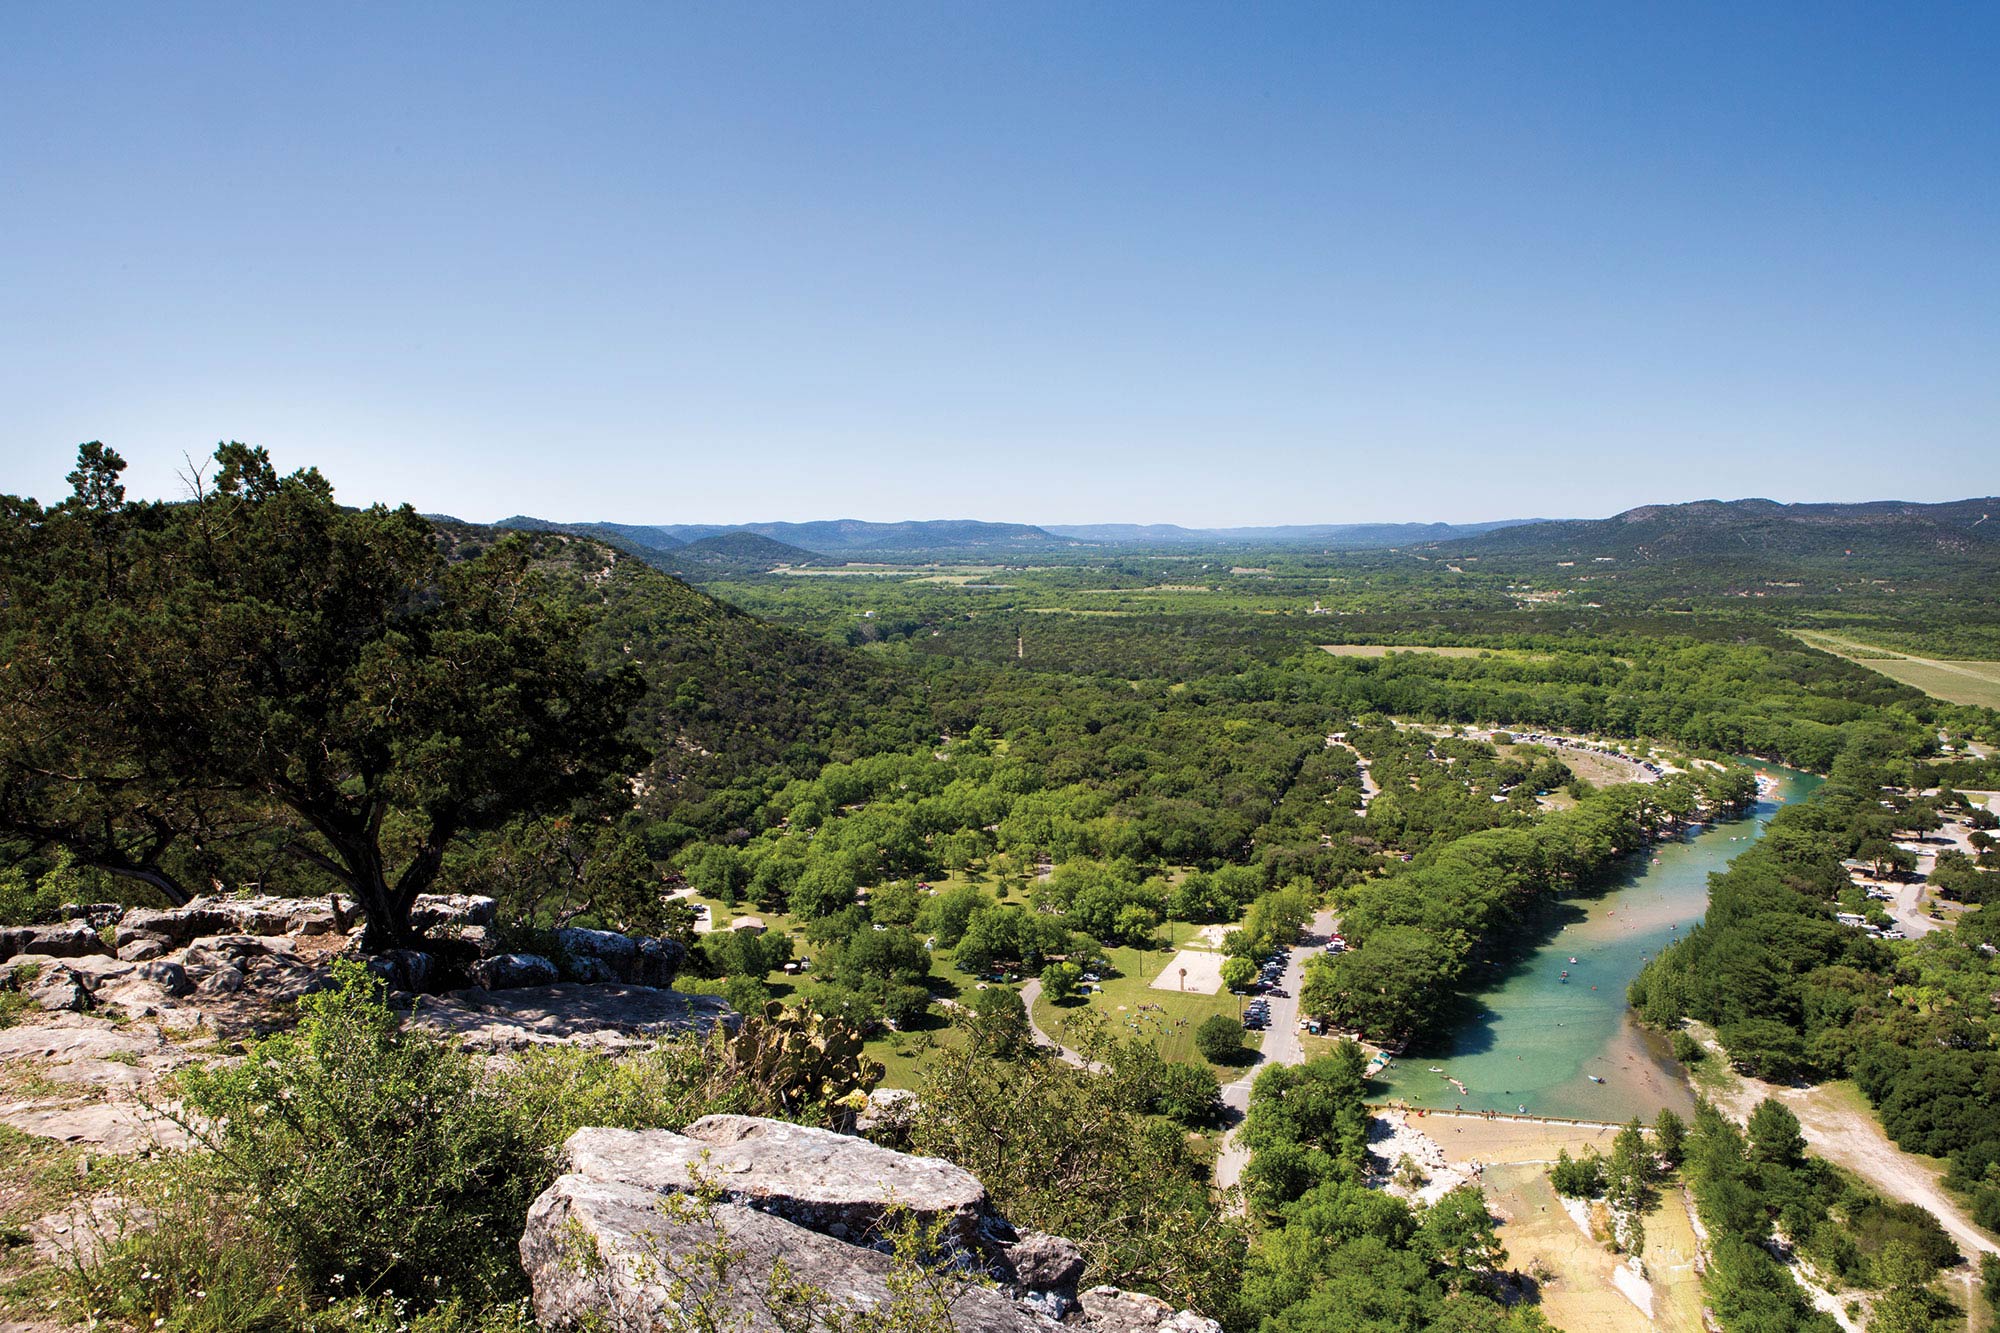 A view of the Frio River with blue sky and lots of trees